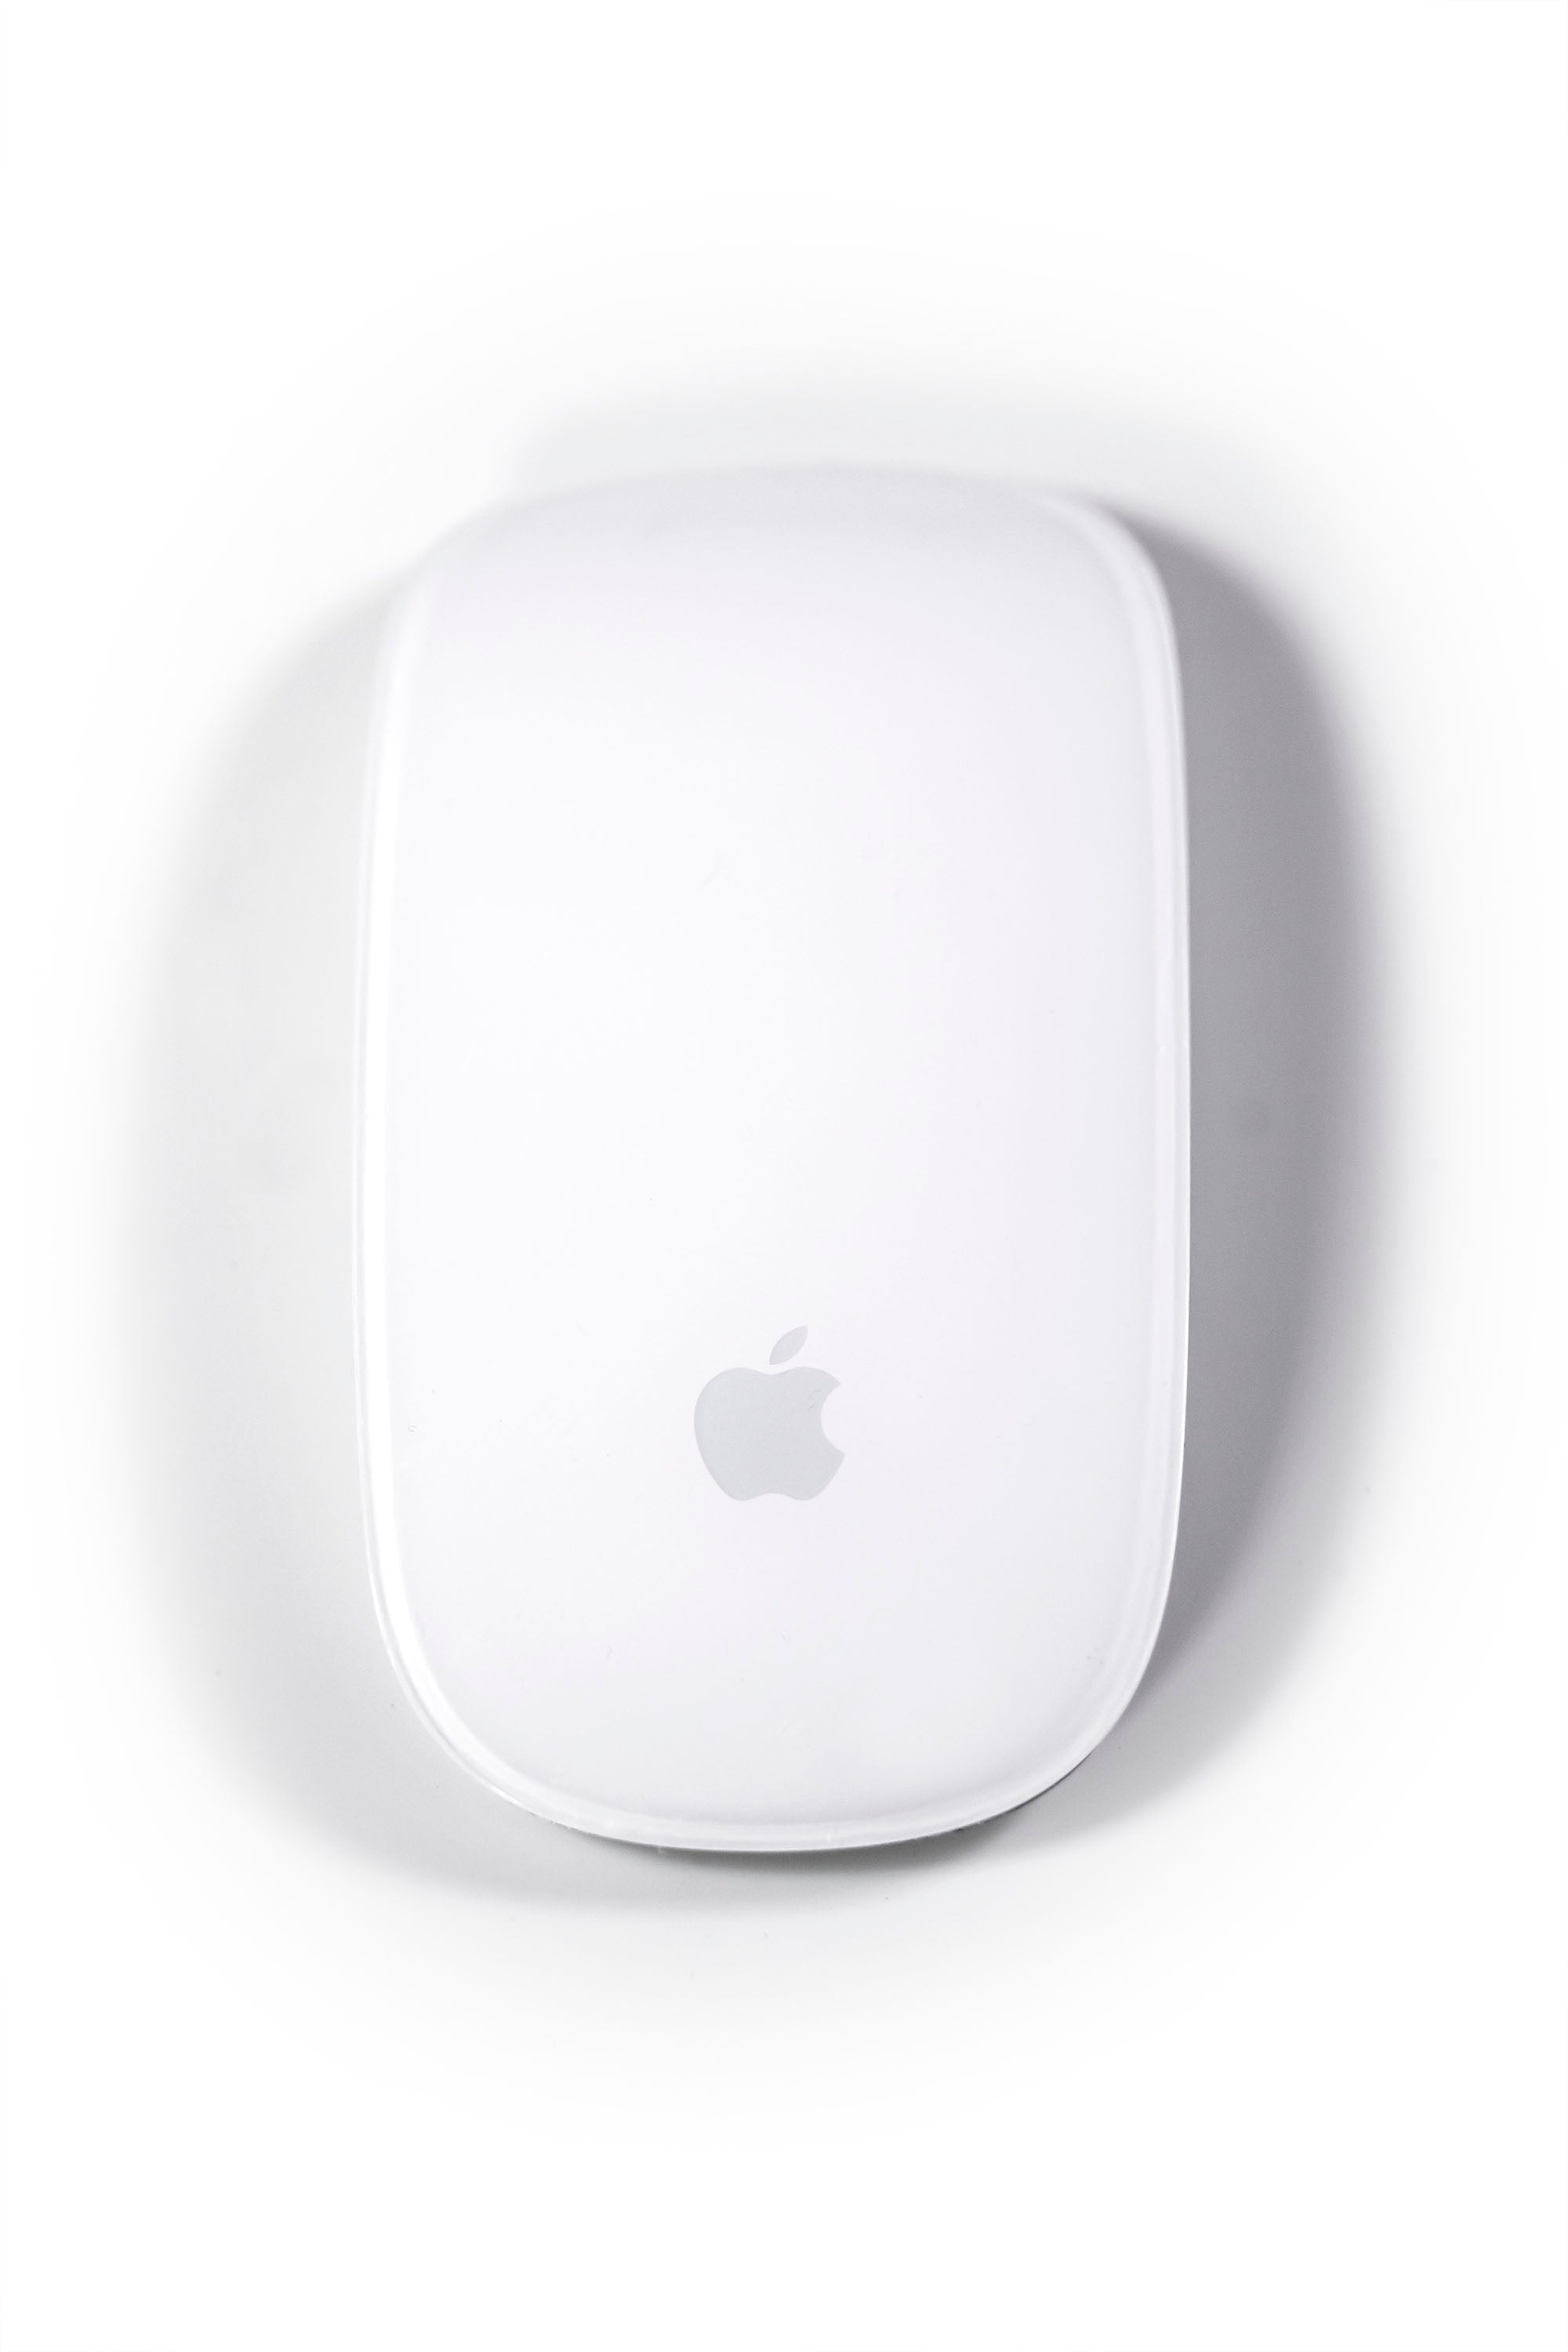 Apple Magic Mouse 2 Rechargeable Bluetooth Wireless A1657 MLA02LL